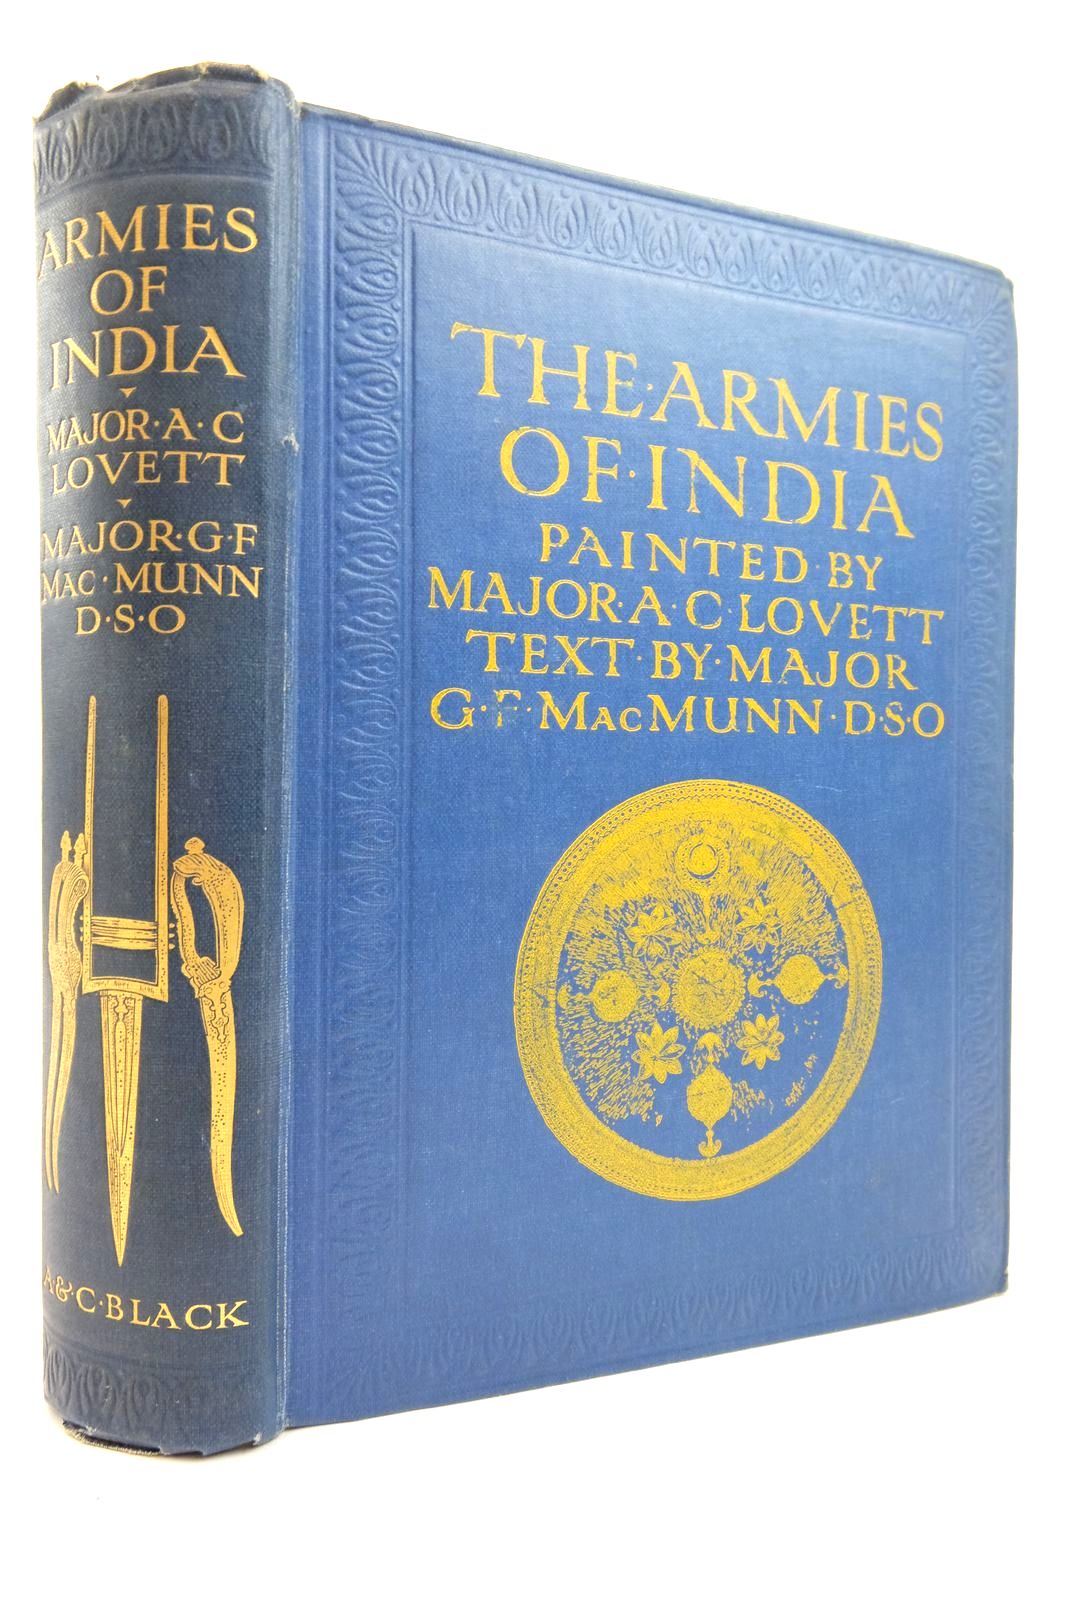 Photo of THE ARMIES OF INDIA written by Macmunn, G.F. illustrated by Lovett, A.C. published by Adam &amp; Charles Black (STOCK CODE: 2137508)  for sale by Stella & Rose's Books